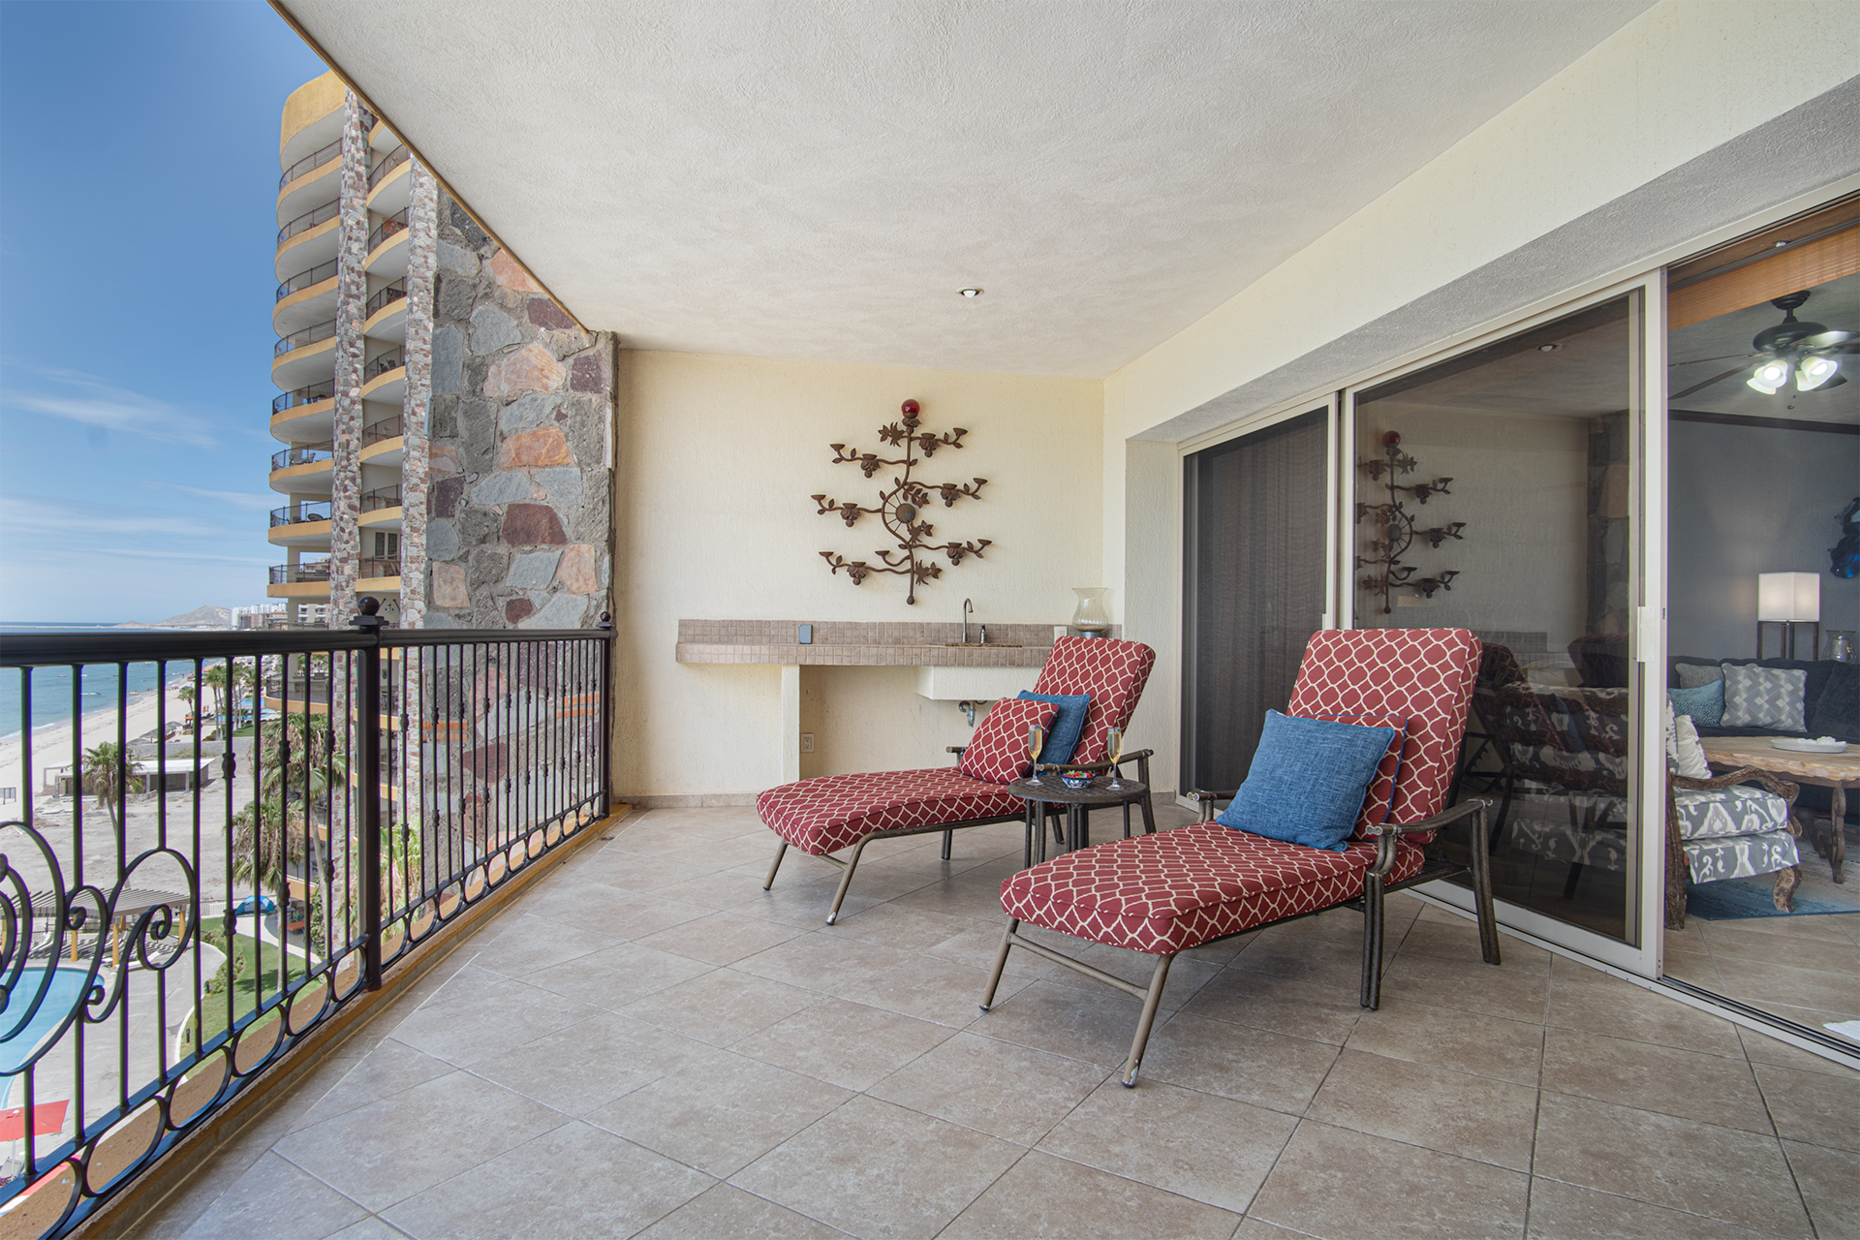 Chaise lounges for enjoy the great patio views